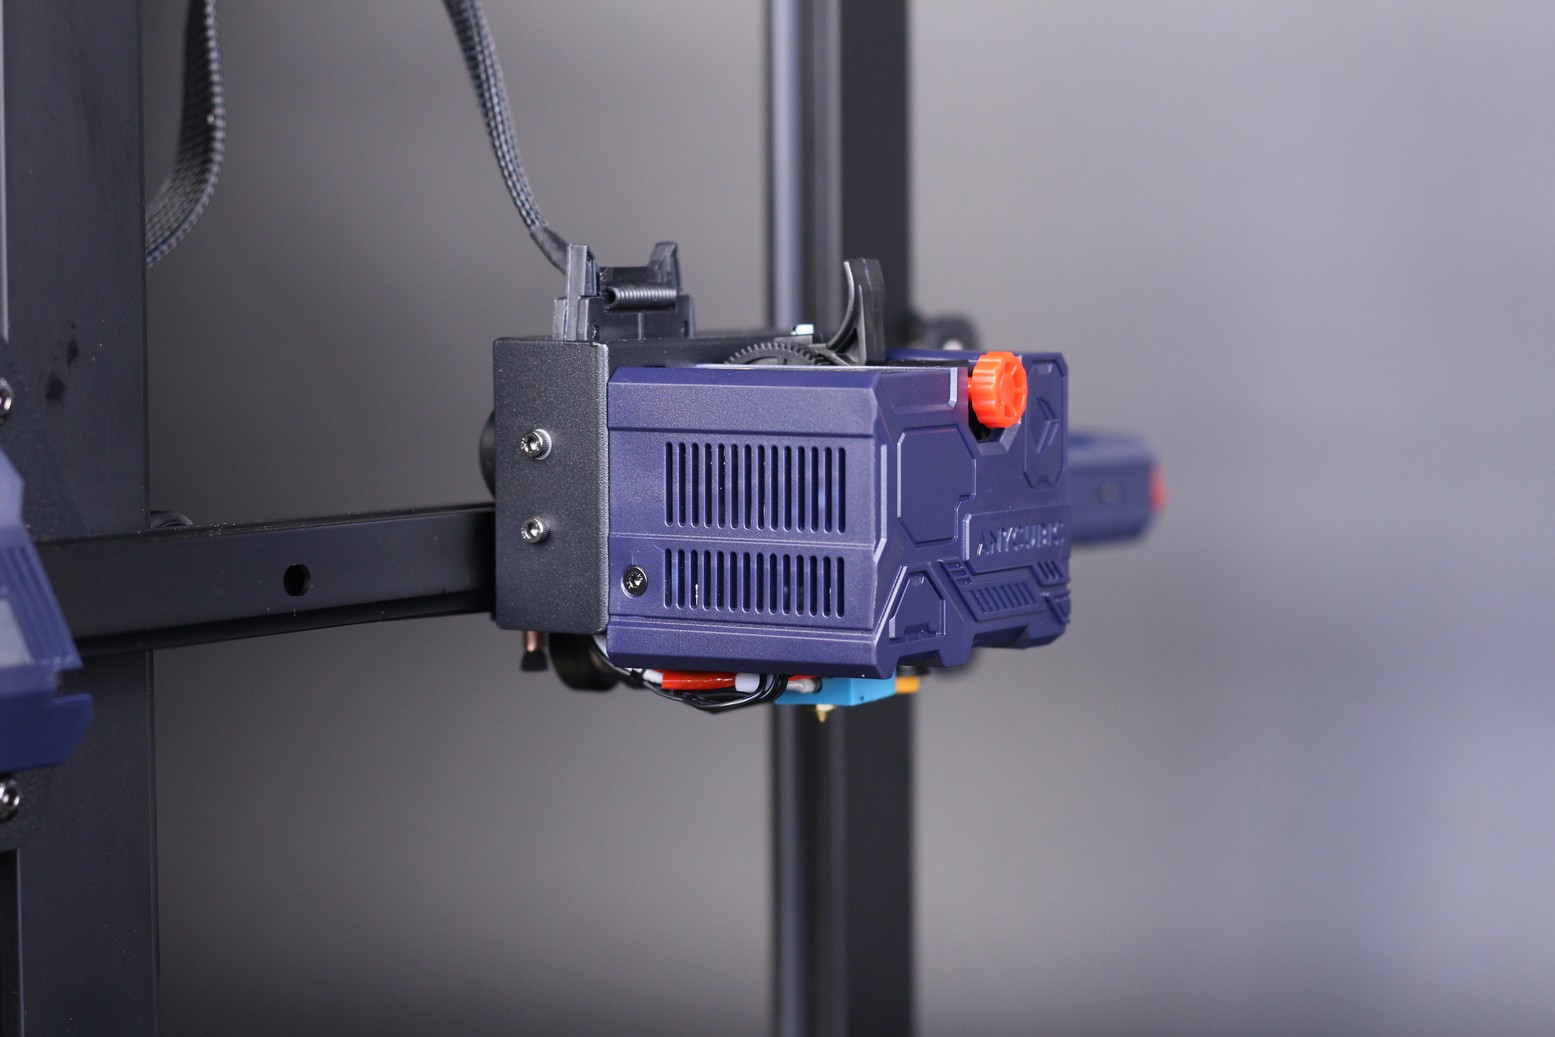 Anycubic Kobra Direct Drive Extruder 1 | Anycubic Kobra Review: The New Budget Standard